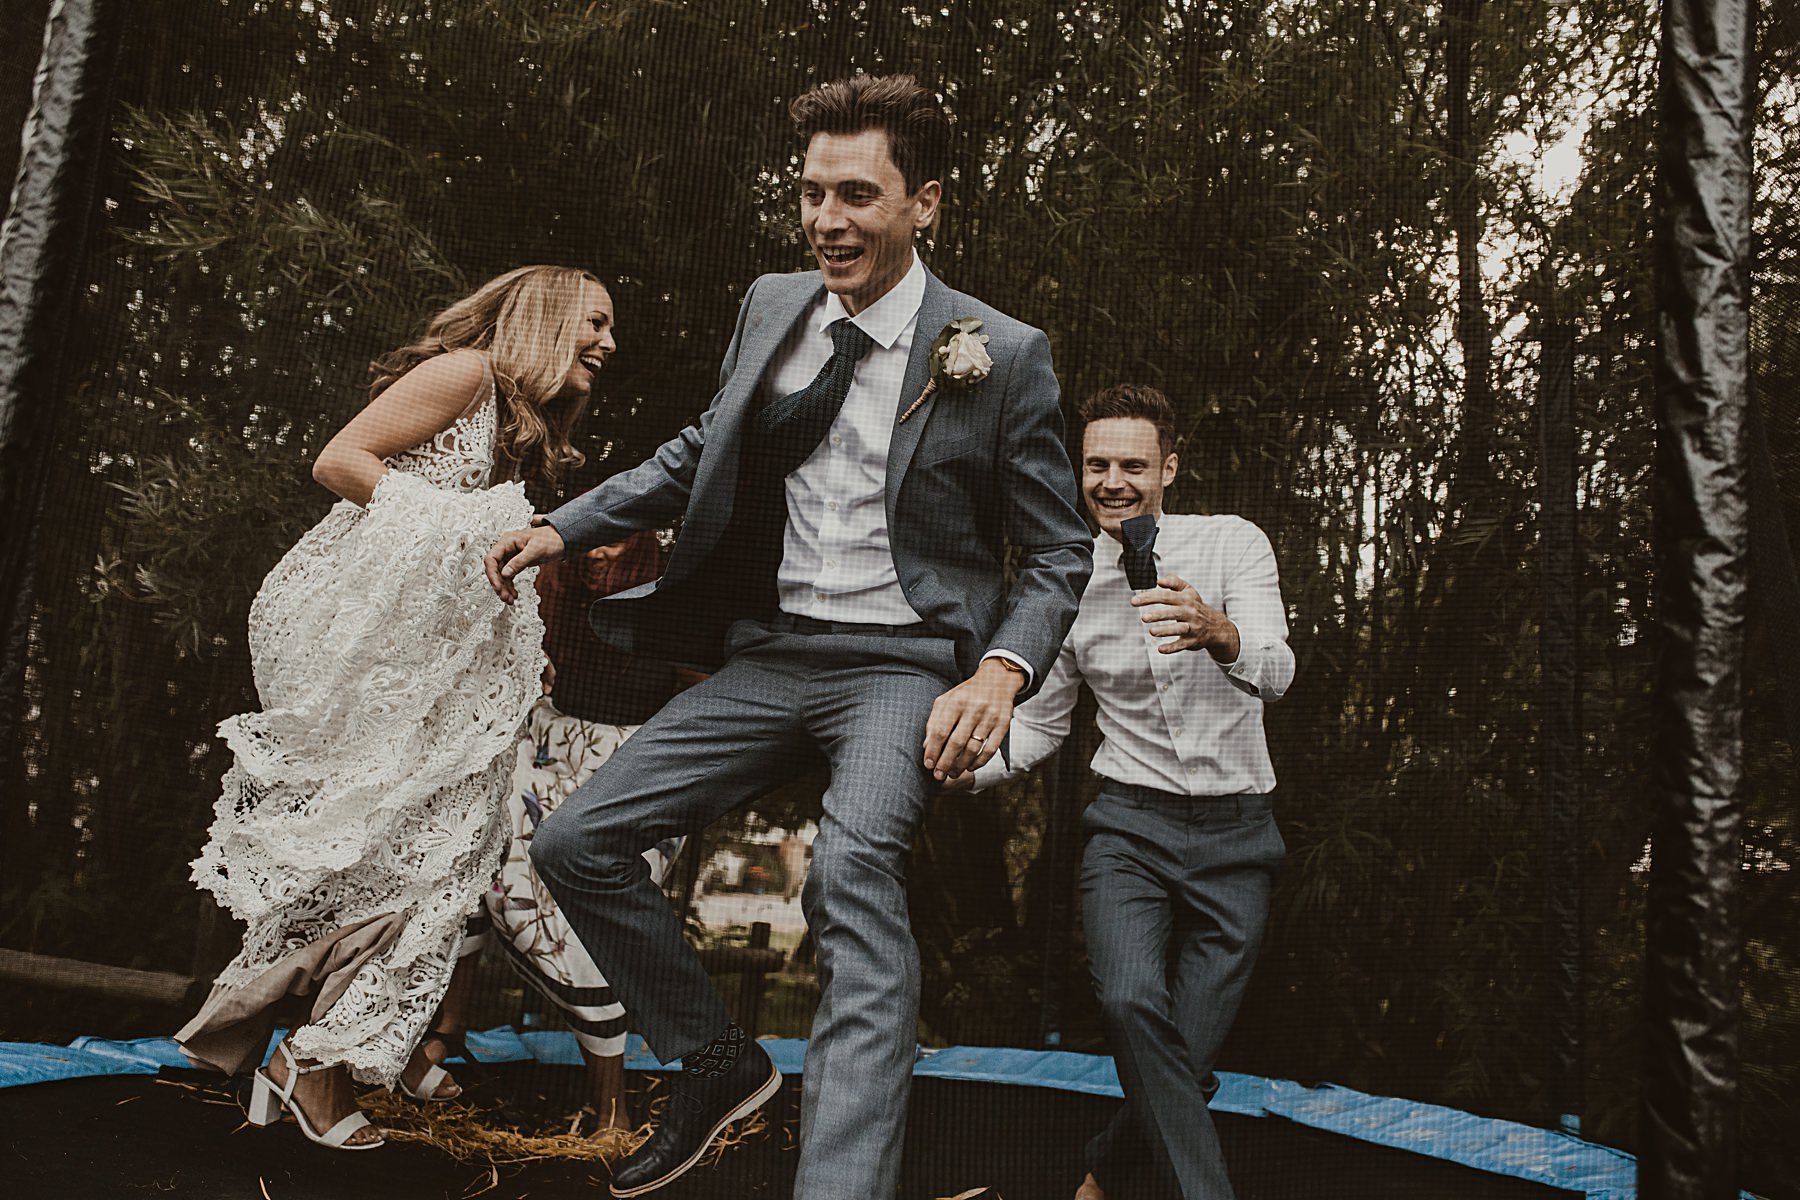 Bride and groom jumping on trampoline